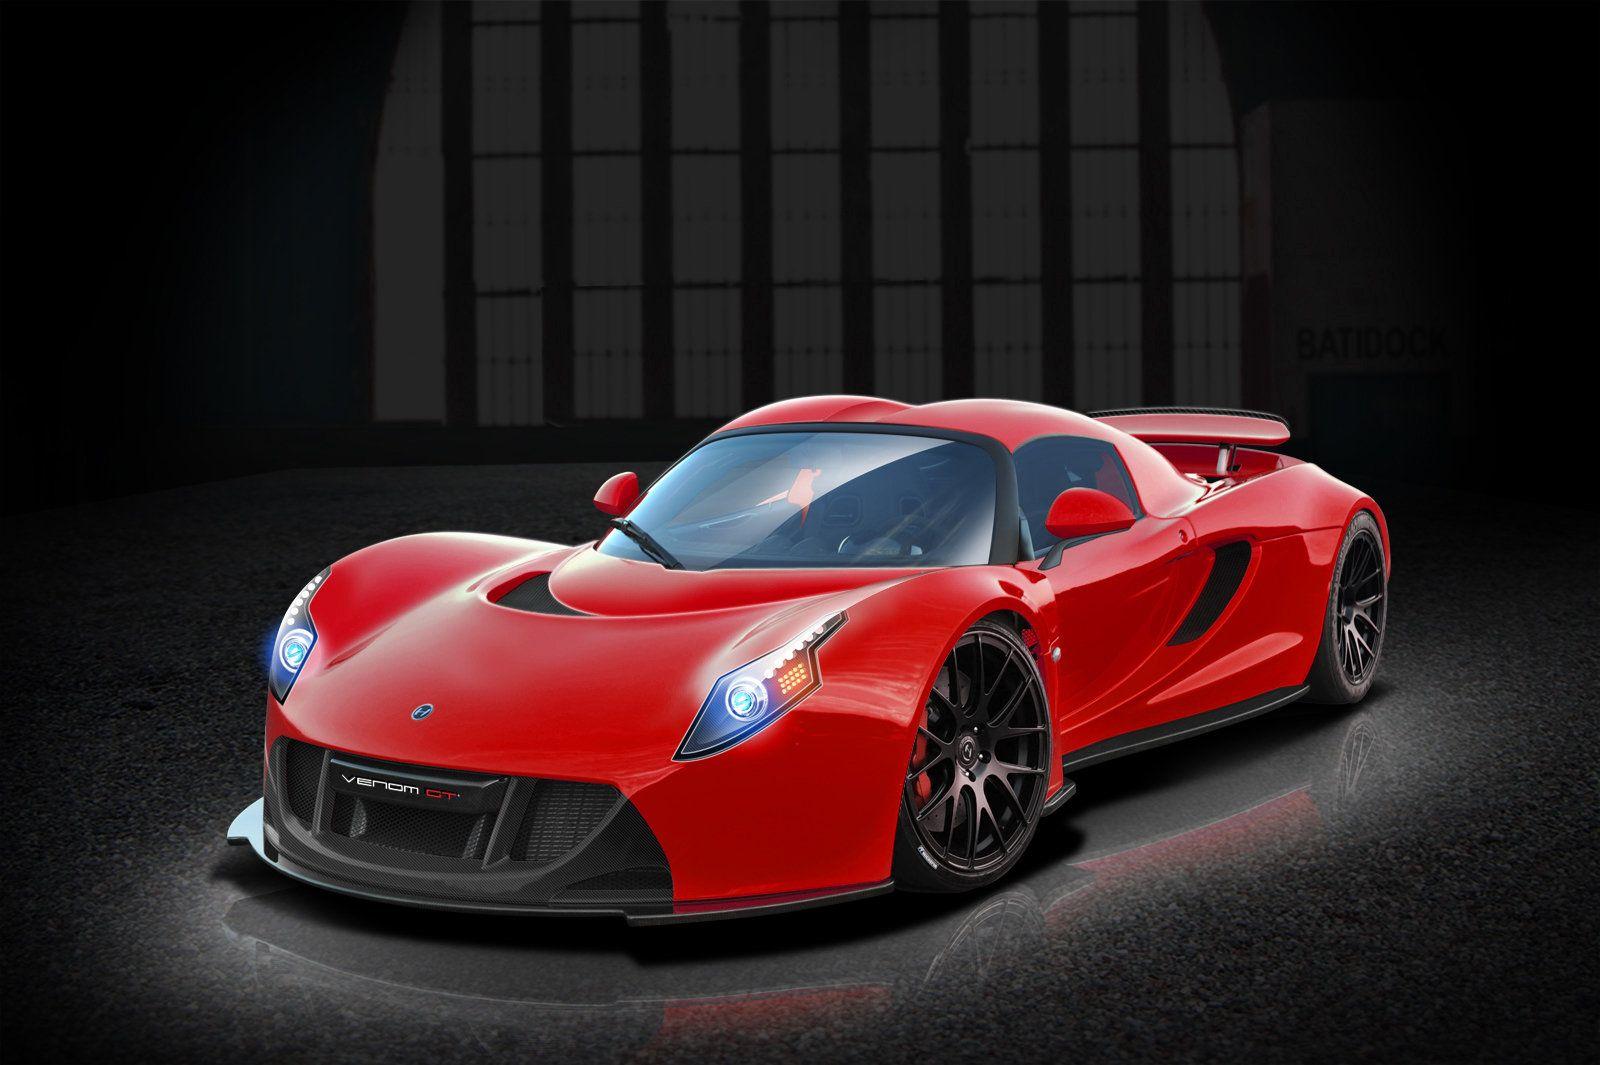 Hennessy Car Company Logo - Hennessey Venom Reviews, Specs, Prices, Photos And Videos | Top Speed